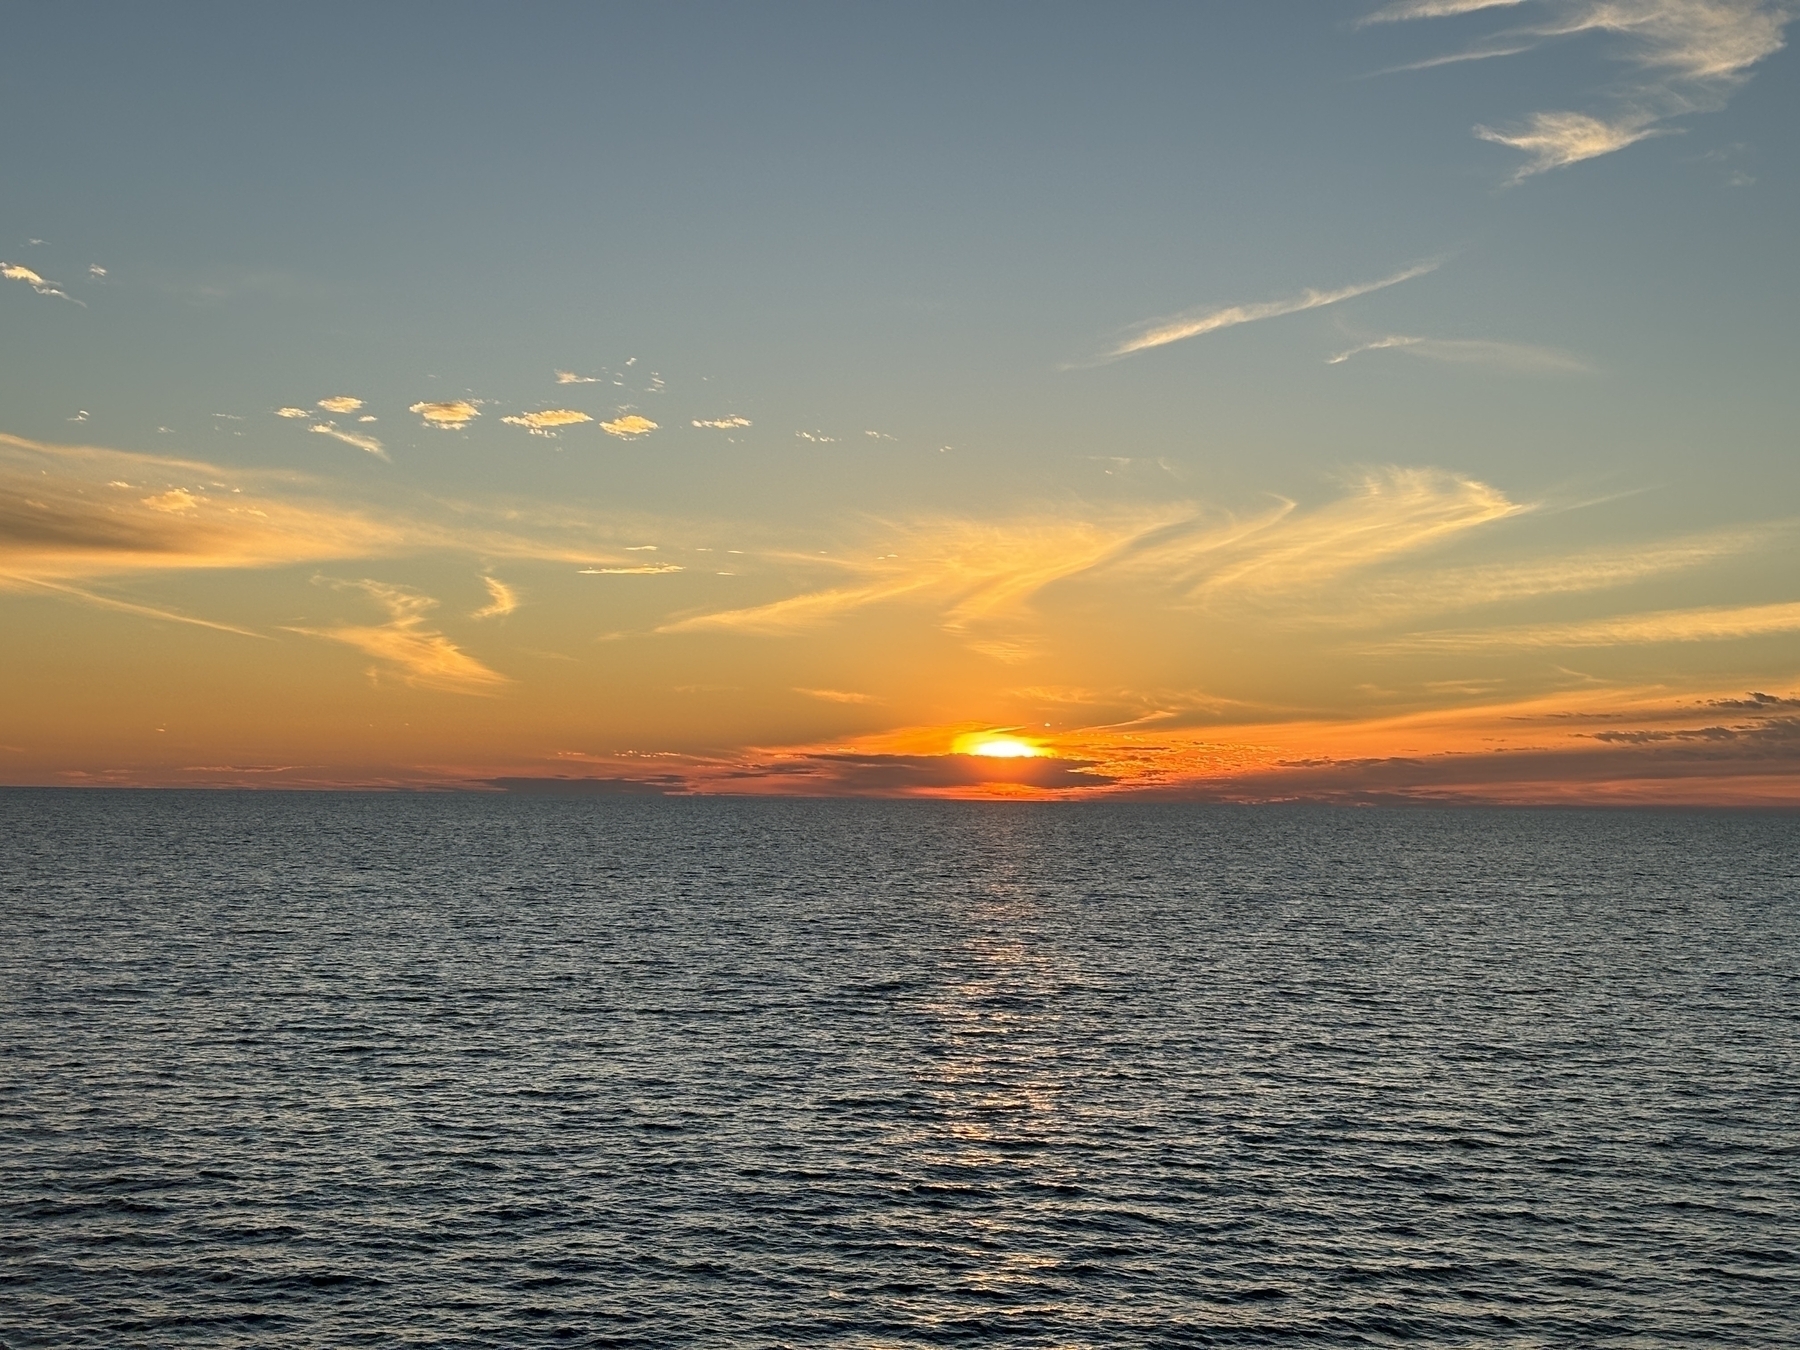 A sunset over the Gulf of Mexico 